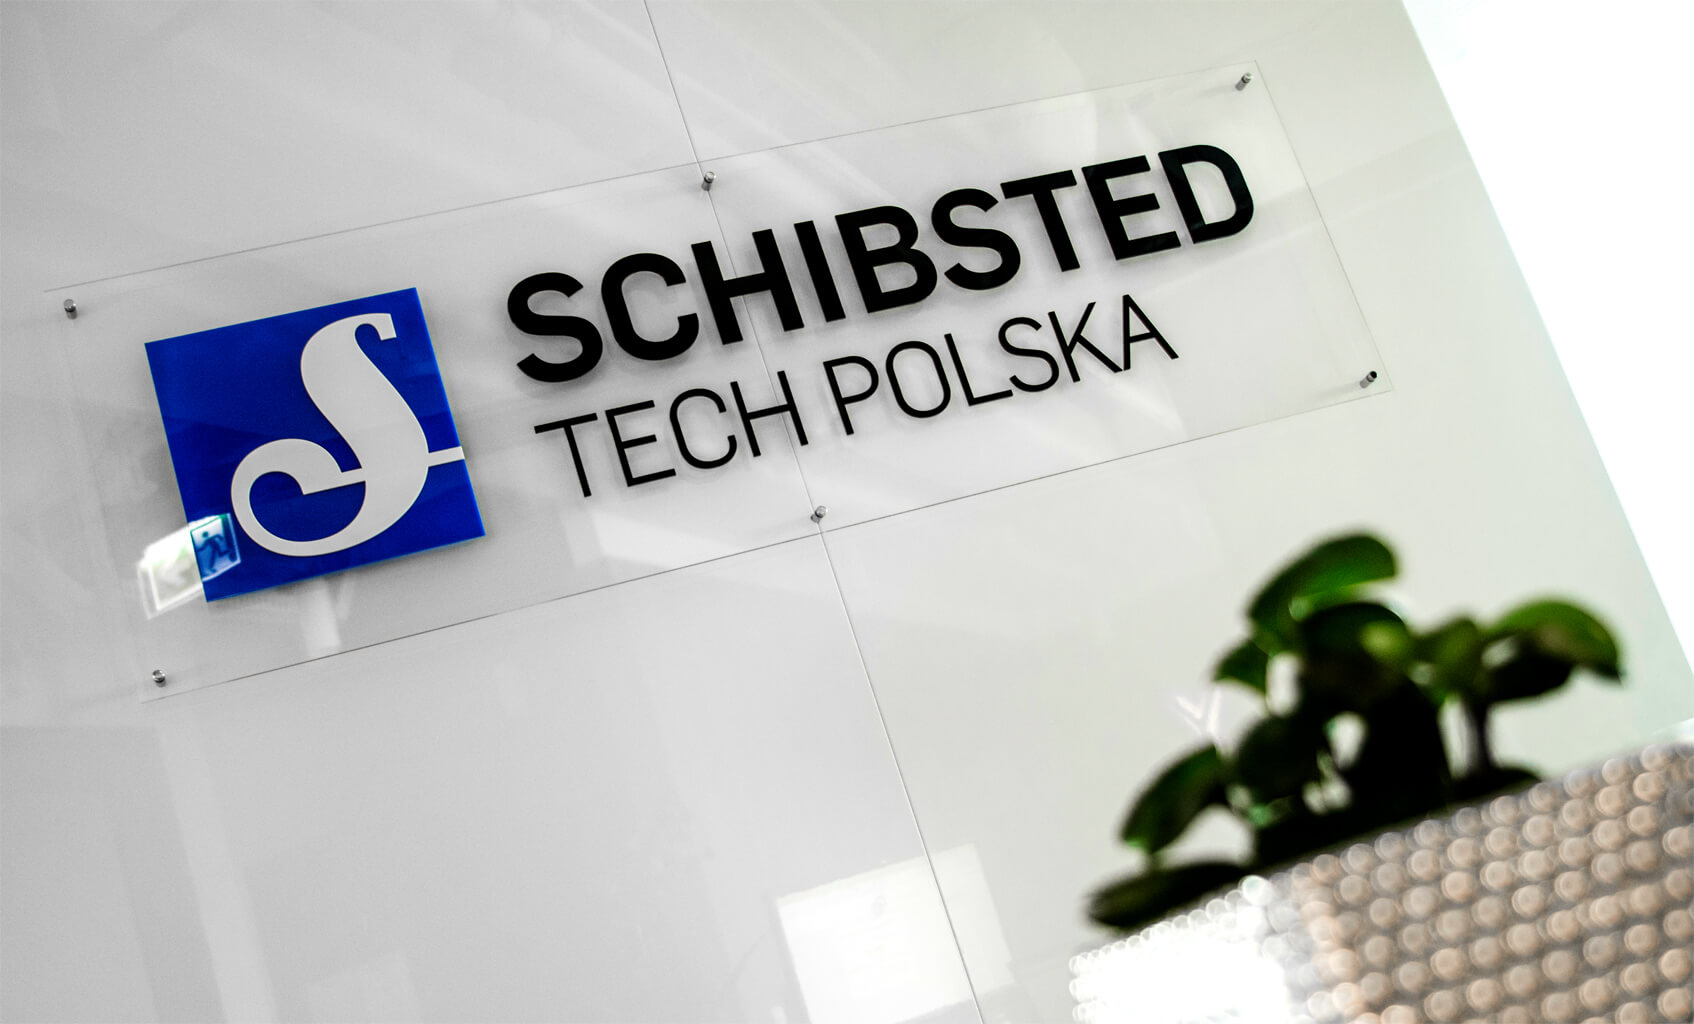 Schibsted Tech Polska - Schibsted Tech Poland - 3D logo and 3D letters on plexiglass backing mounted on spacers in reception area